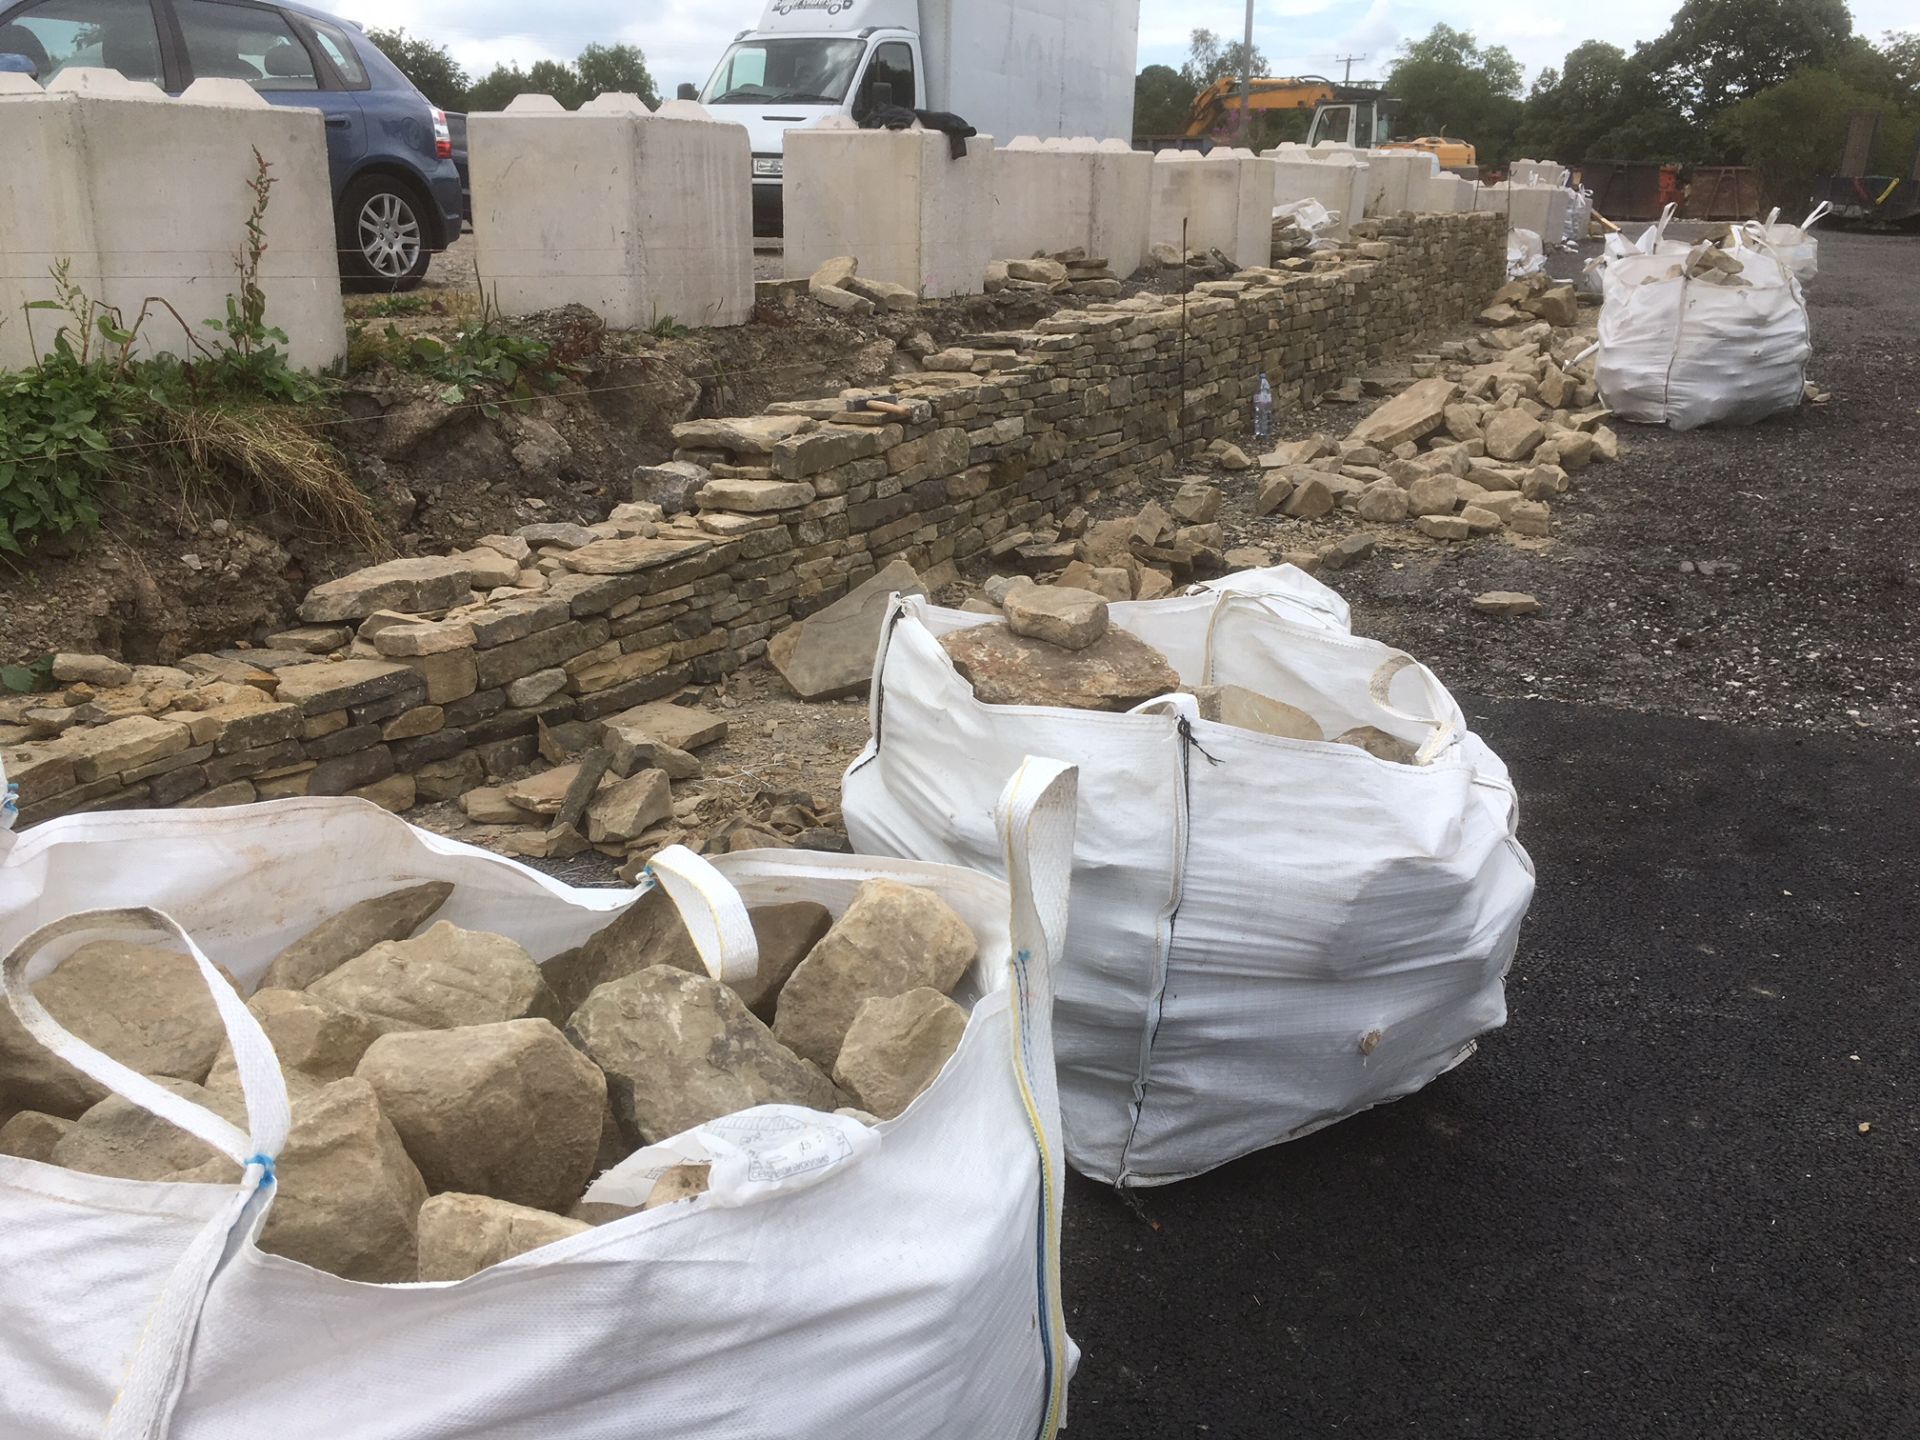 24 bulk bags Yorkshire Dry Stone Walling, each bag 1tonne, which approximately equates to 1m² of - Image 5 of 9